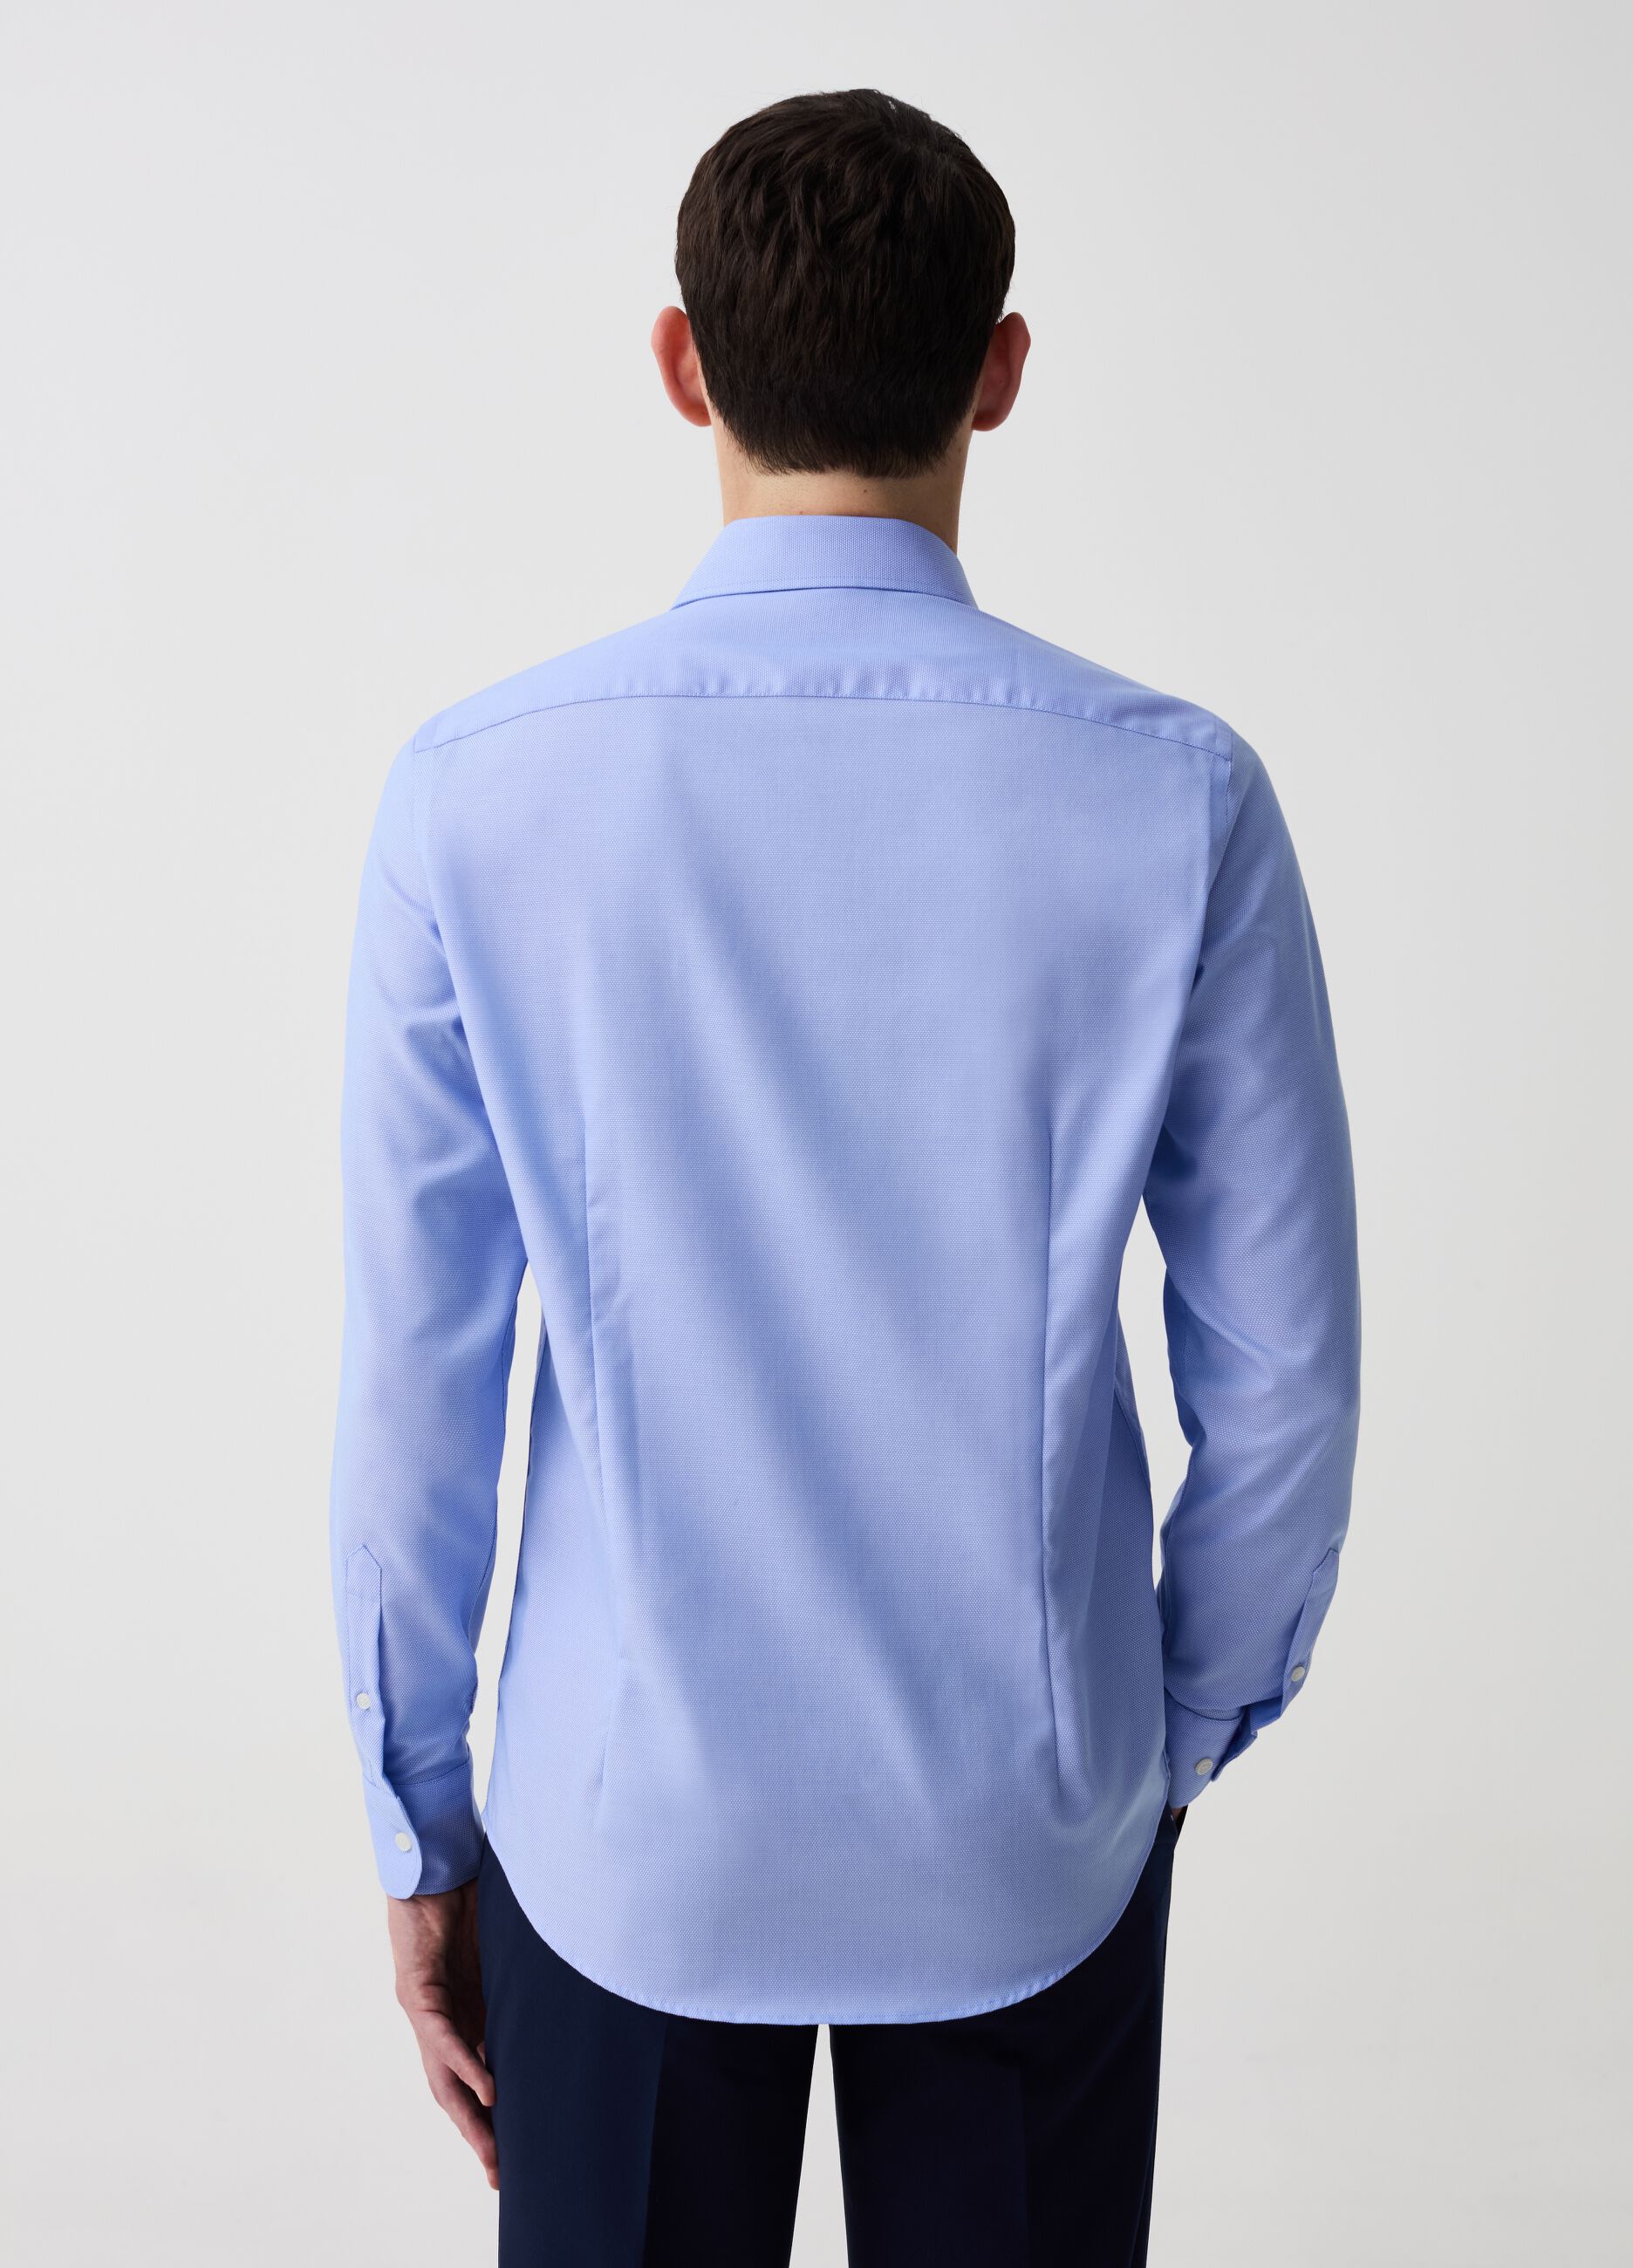 Slim-fit shirt in no-iron Oxford